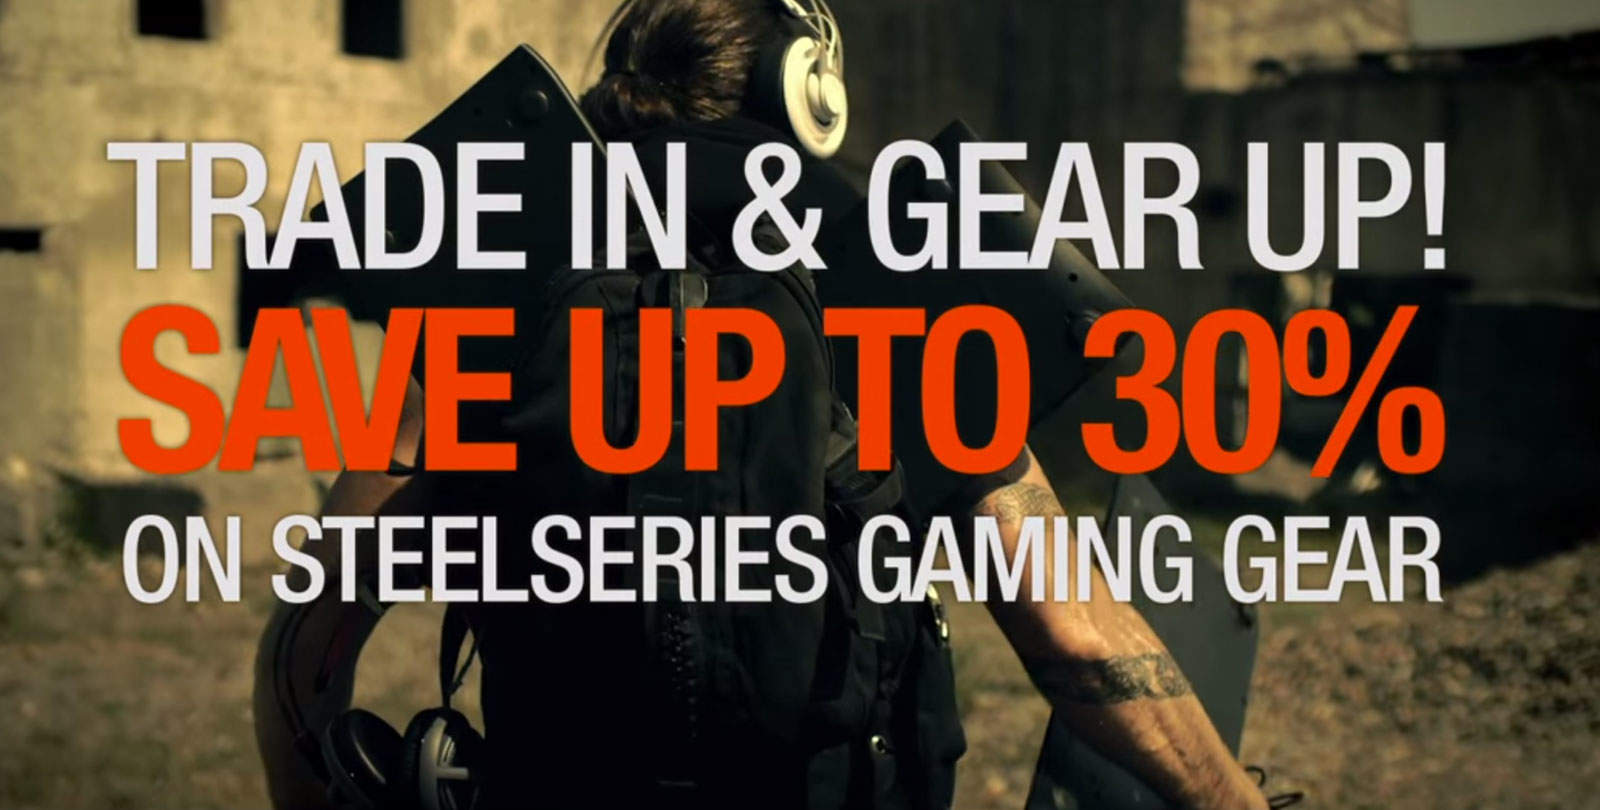 Vamers - FYI - Gaming - Help the Less Fortunate 'Step-Up' with the SteelSeries Peripheral Trade-In Program - Featured Banner